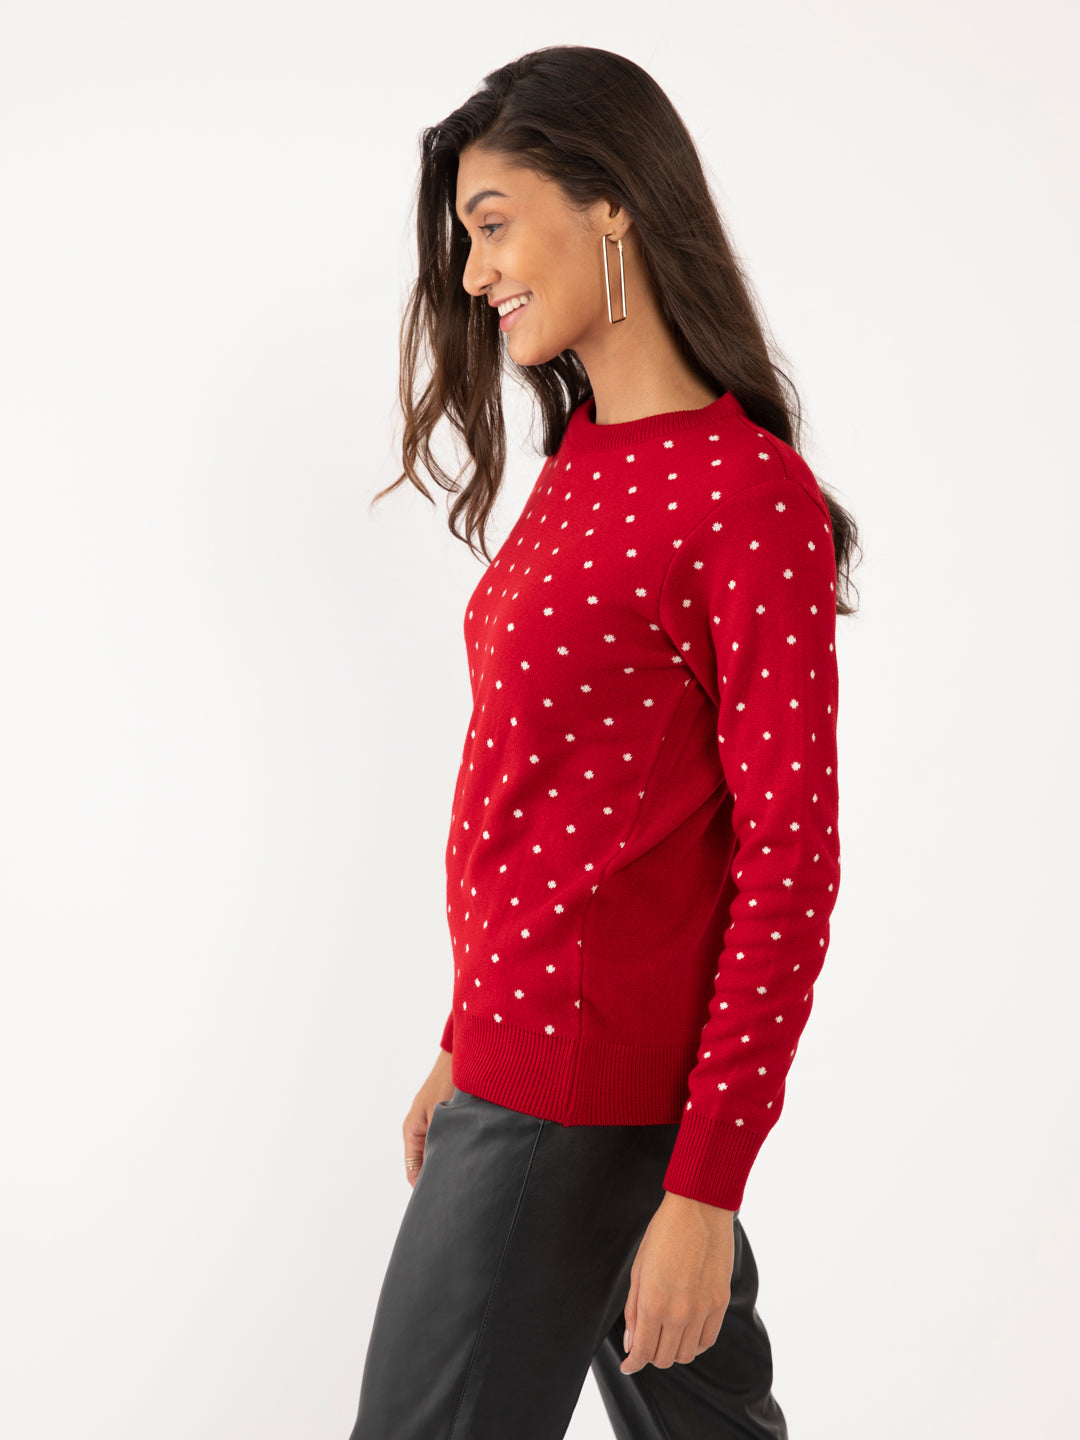 Red Polka Sweater For Women